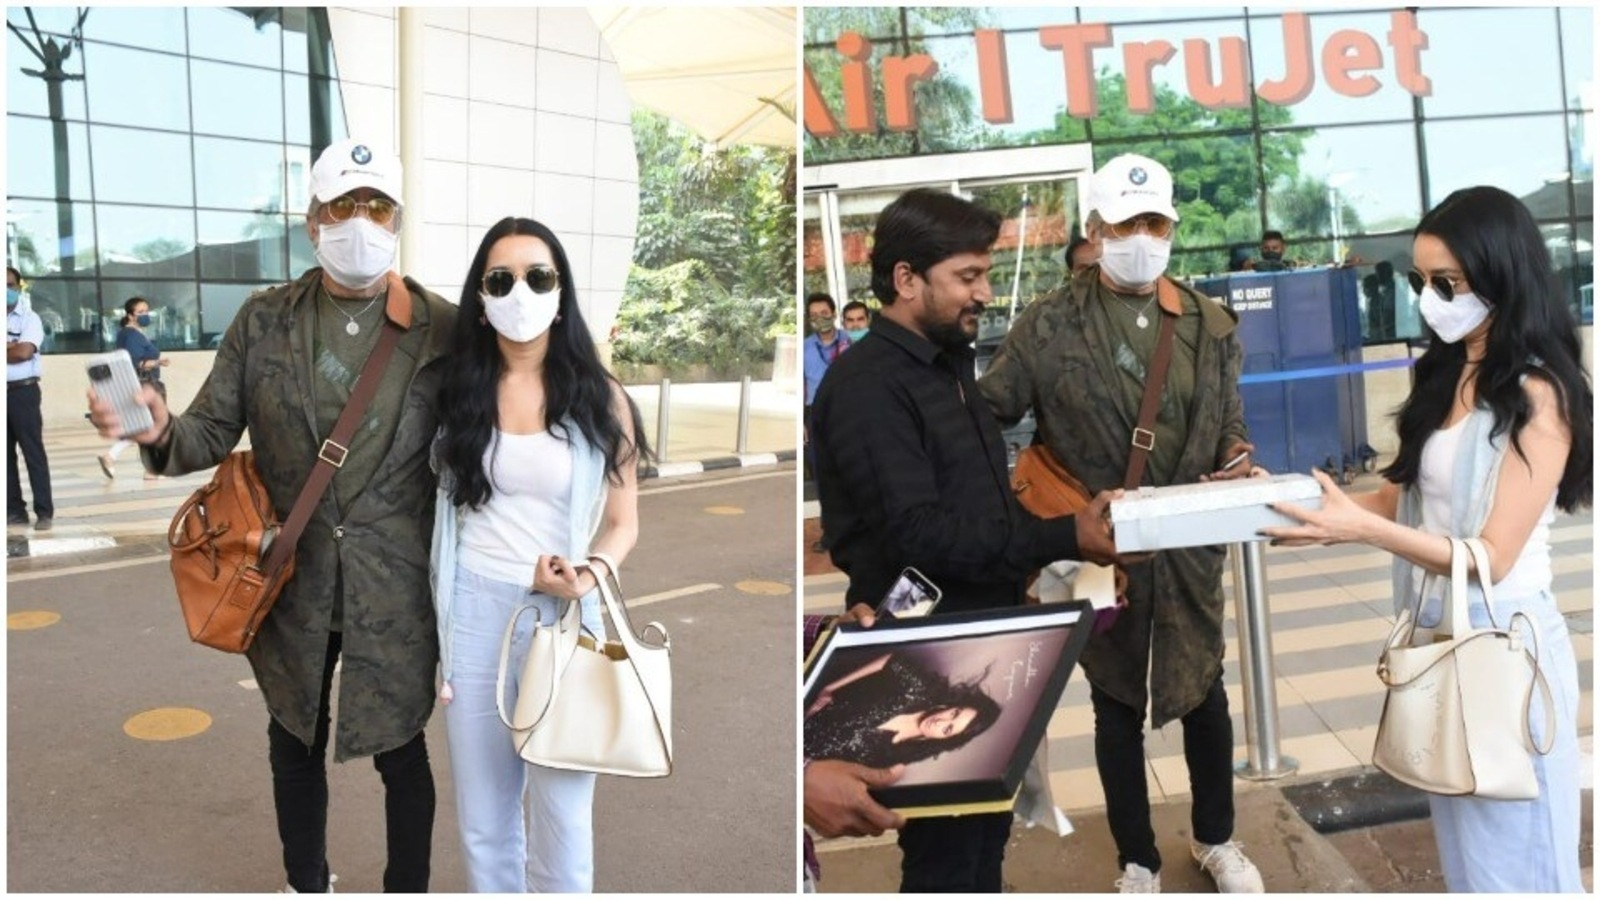 shraddha-kapoor-receives-birthday-presents-from-fans-at-airport-as-she-leaves-with-dad-shakti-kapoor-for-family-getaway